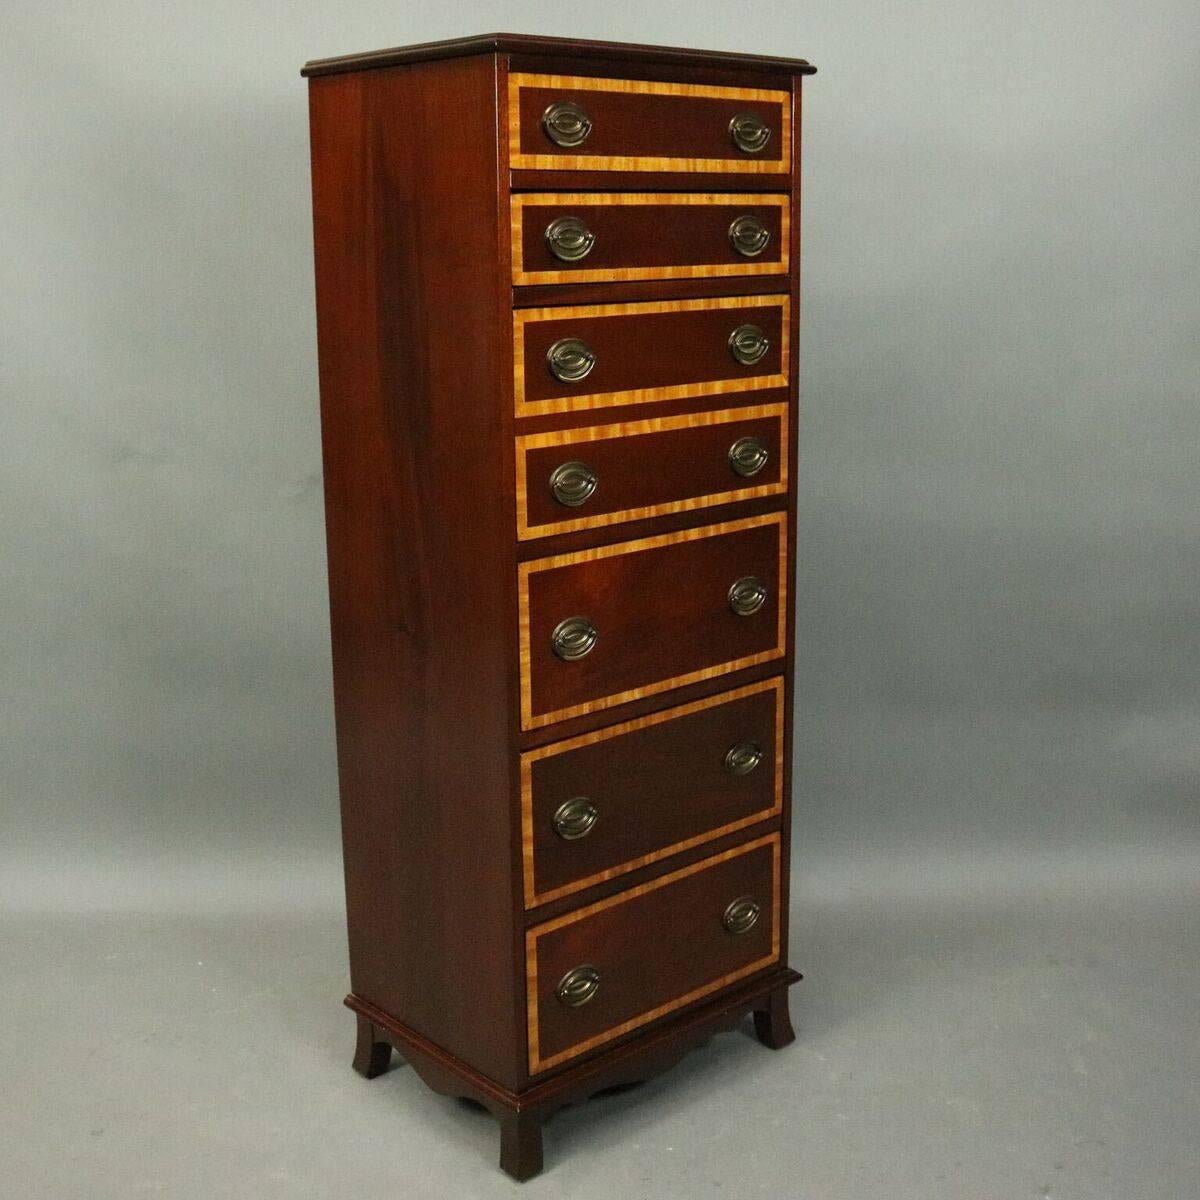 Vintage English lingerie chest features mahogany construction with seven banded drawers (four shallow and three deep drawers) with satinwood inlay, bronze pulls, circa 1940.

Measures: 52.25